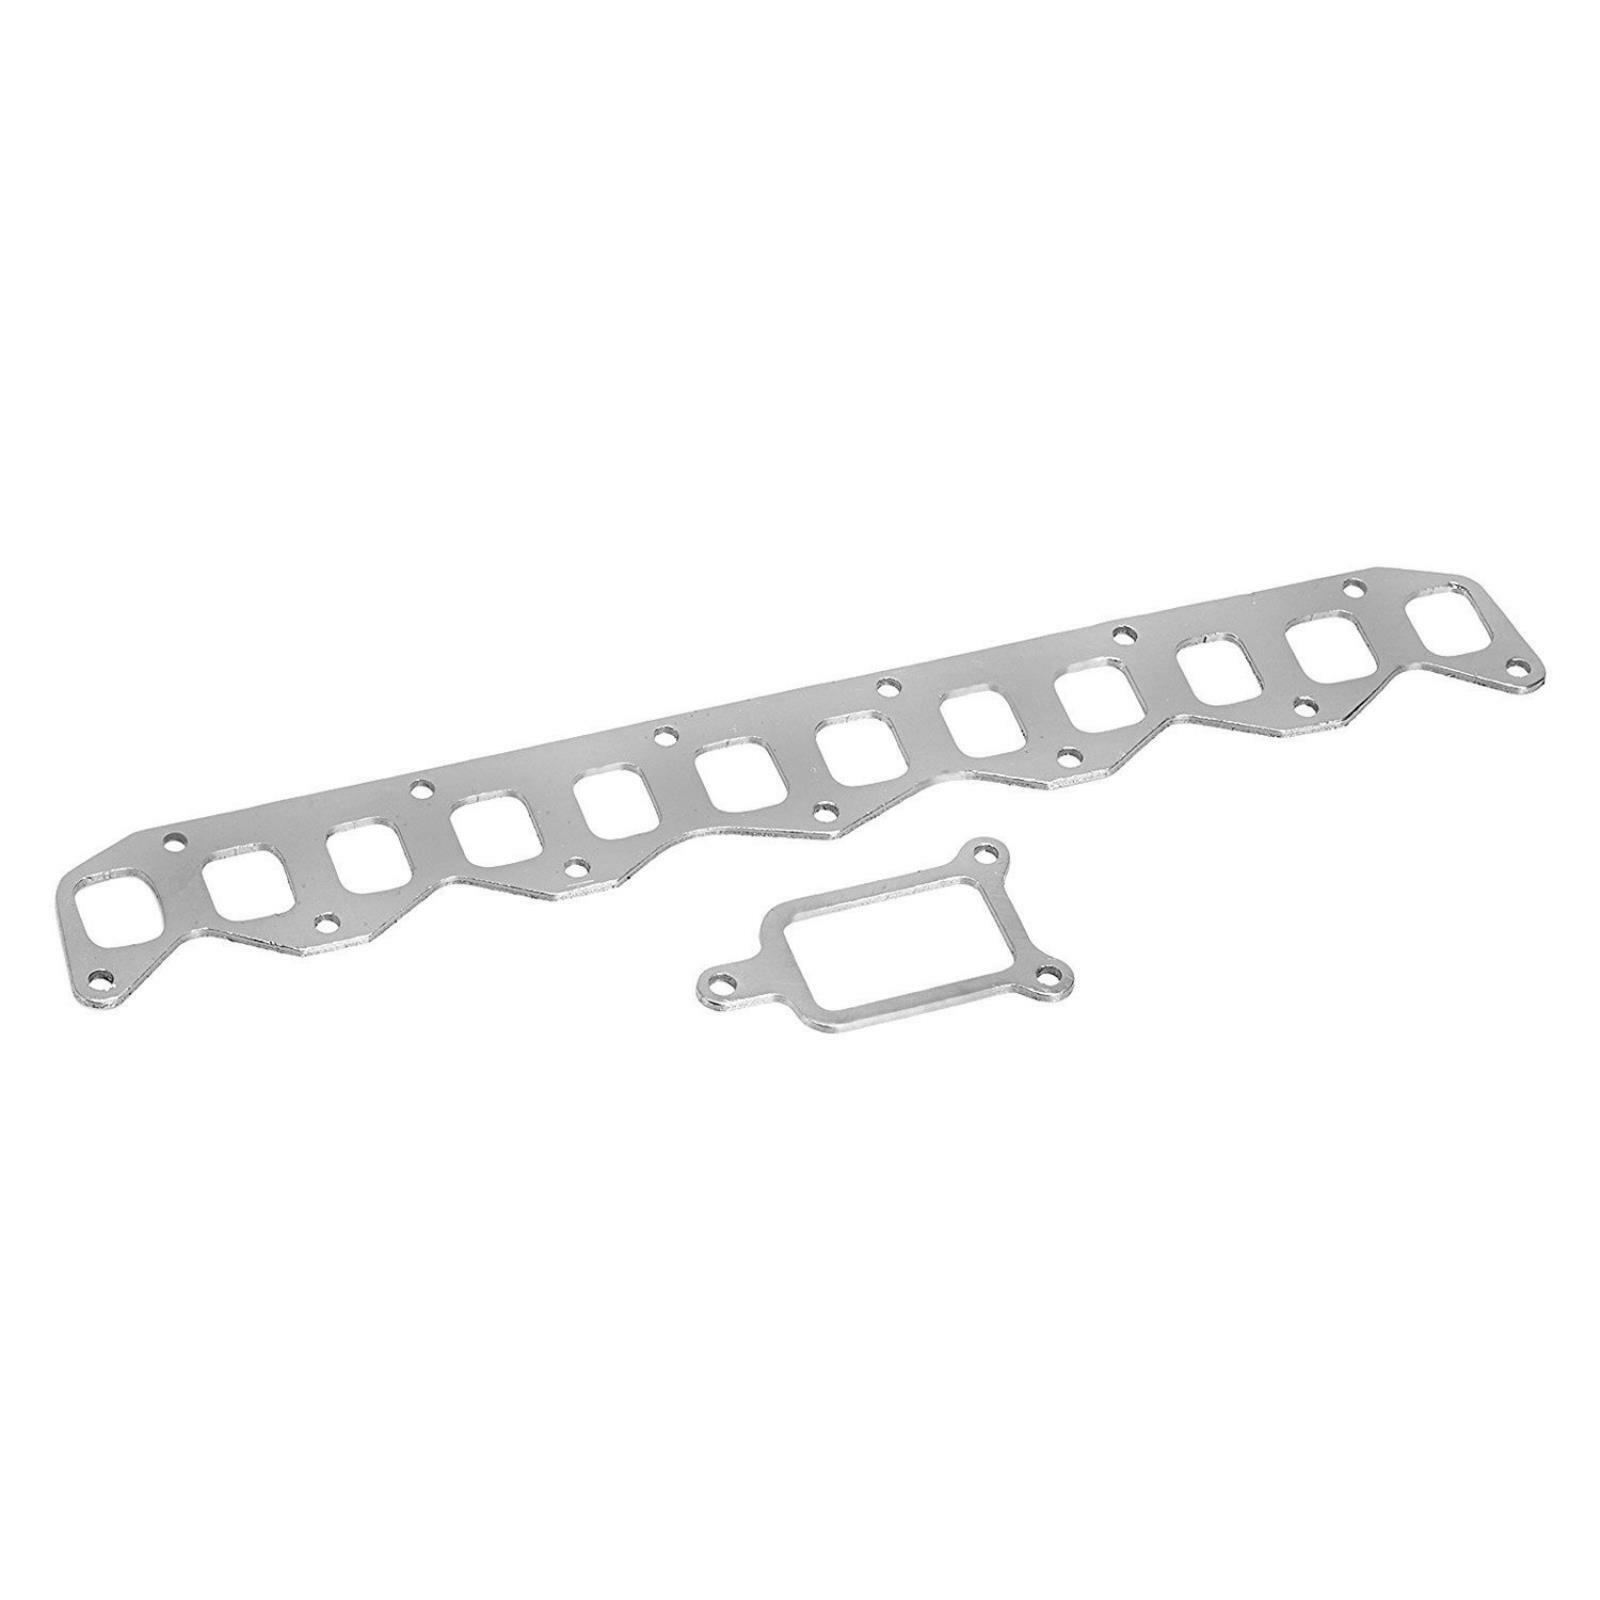 Exhaust Header Gaskets - Remflex A510A9 Fits 1965-1974 Plymouth Satellite